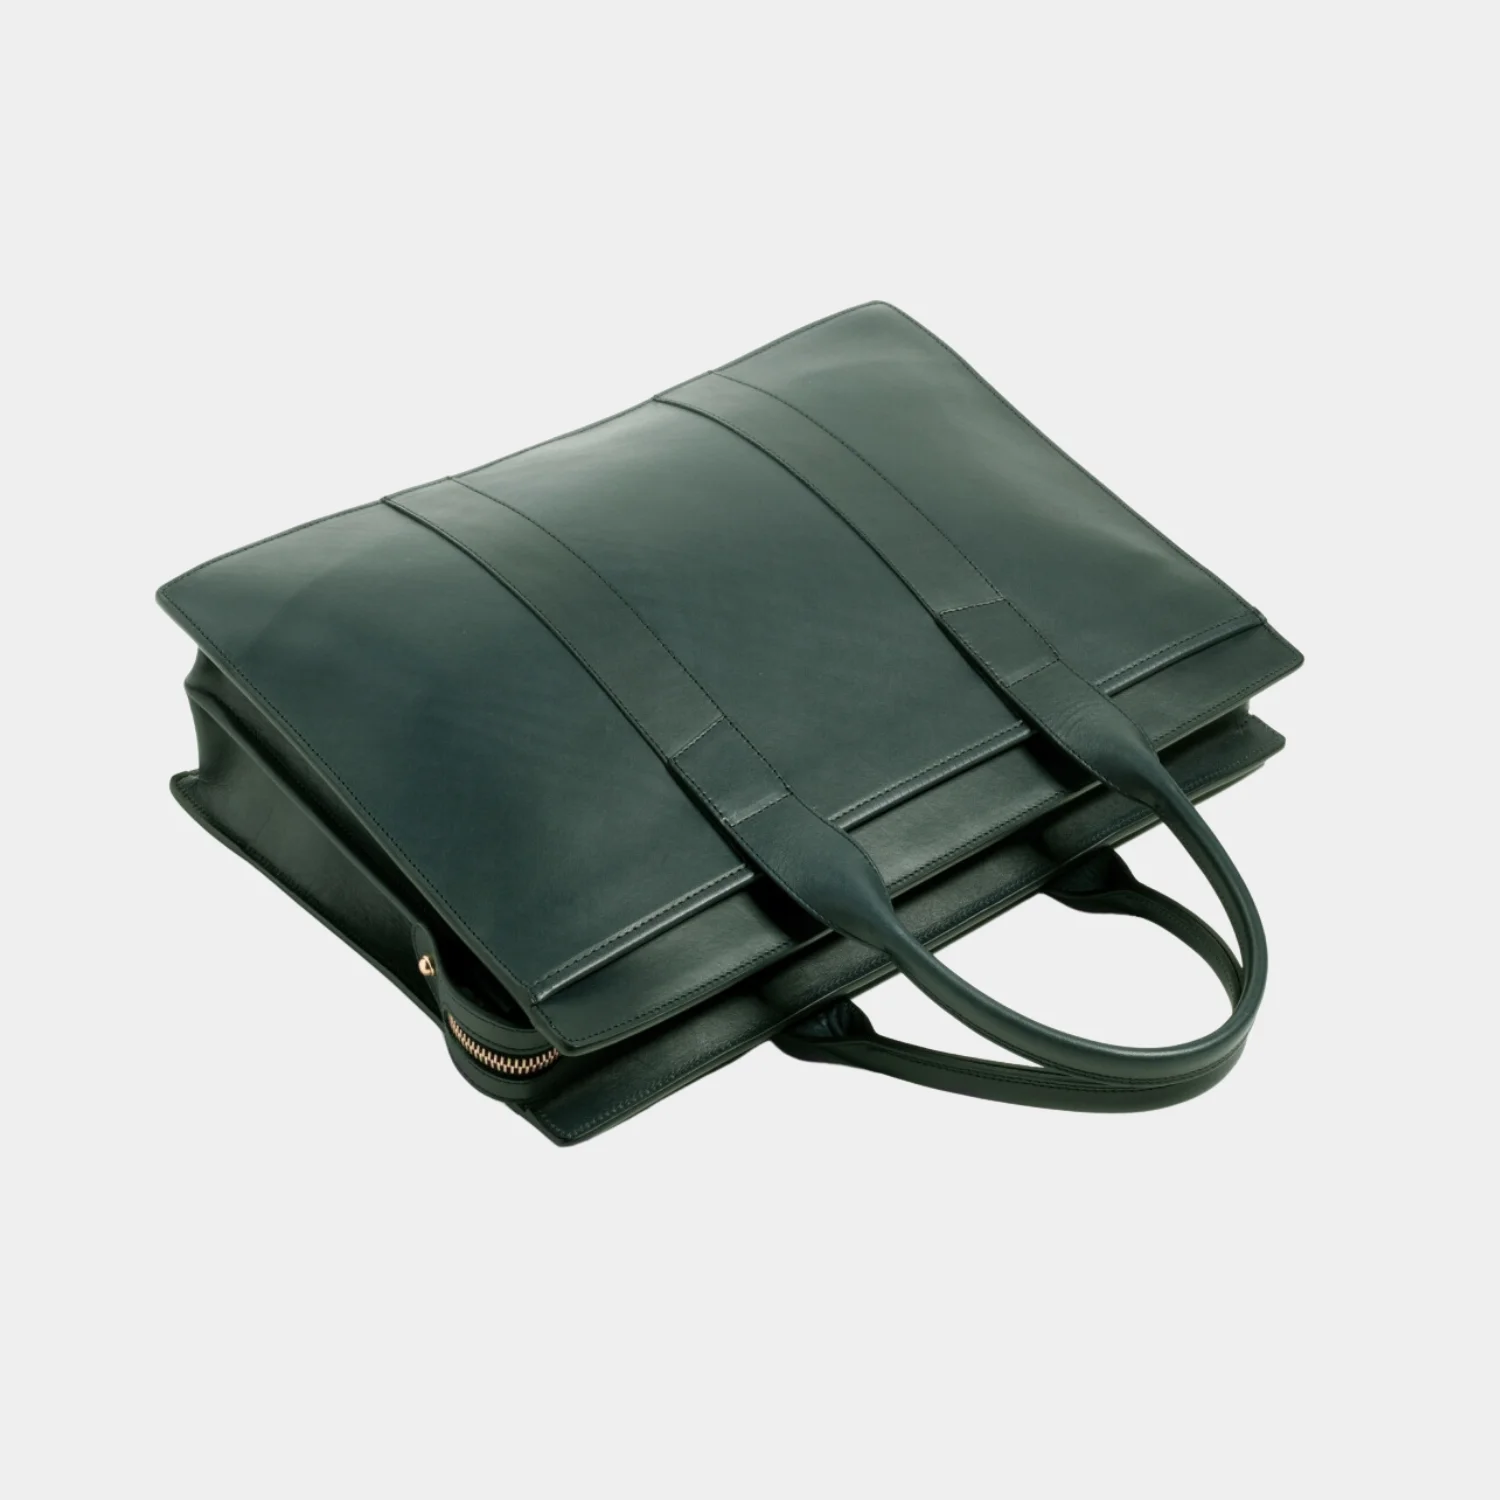 American Style Classy Green Leather Laptop Briefcase Bag